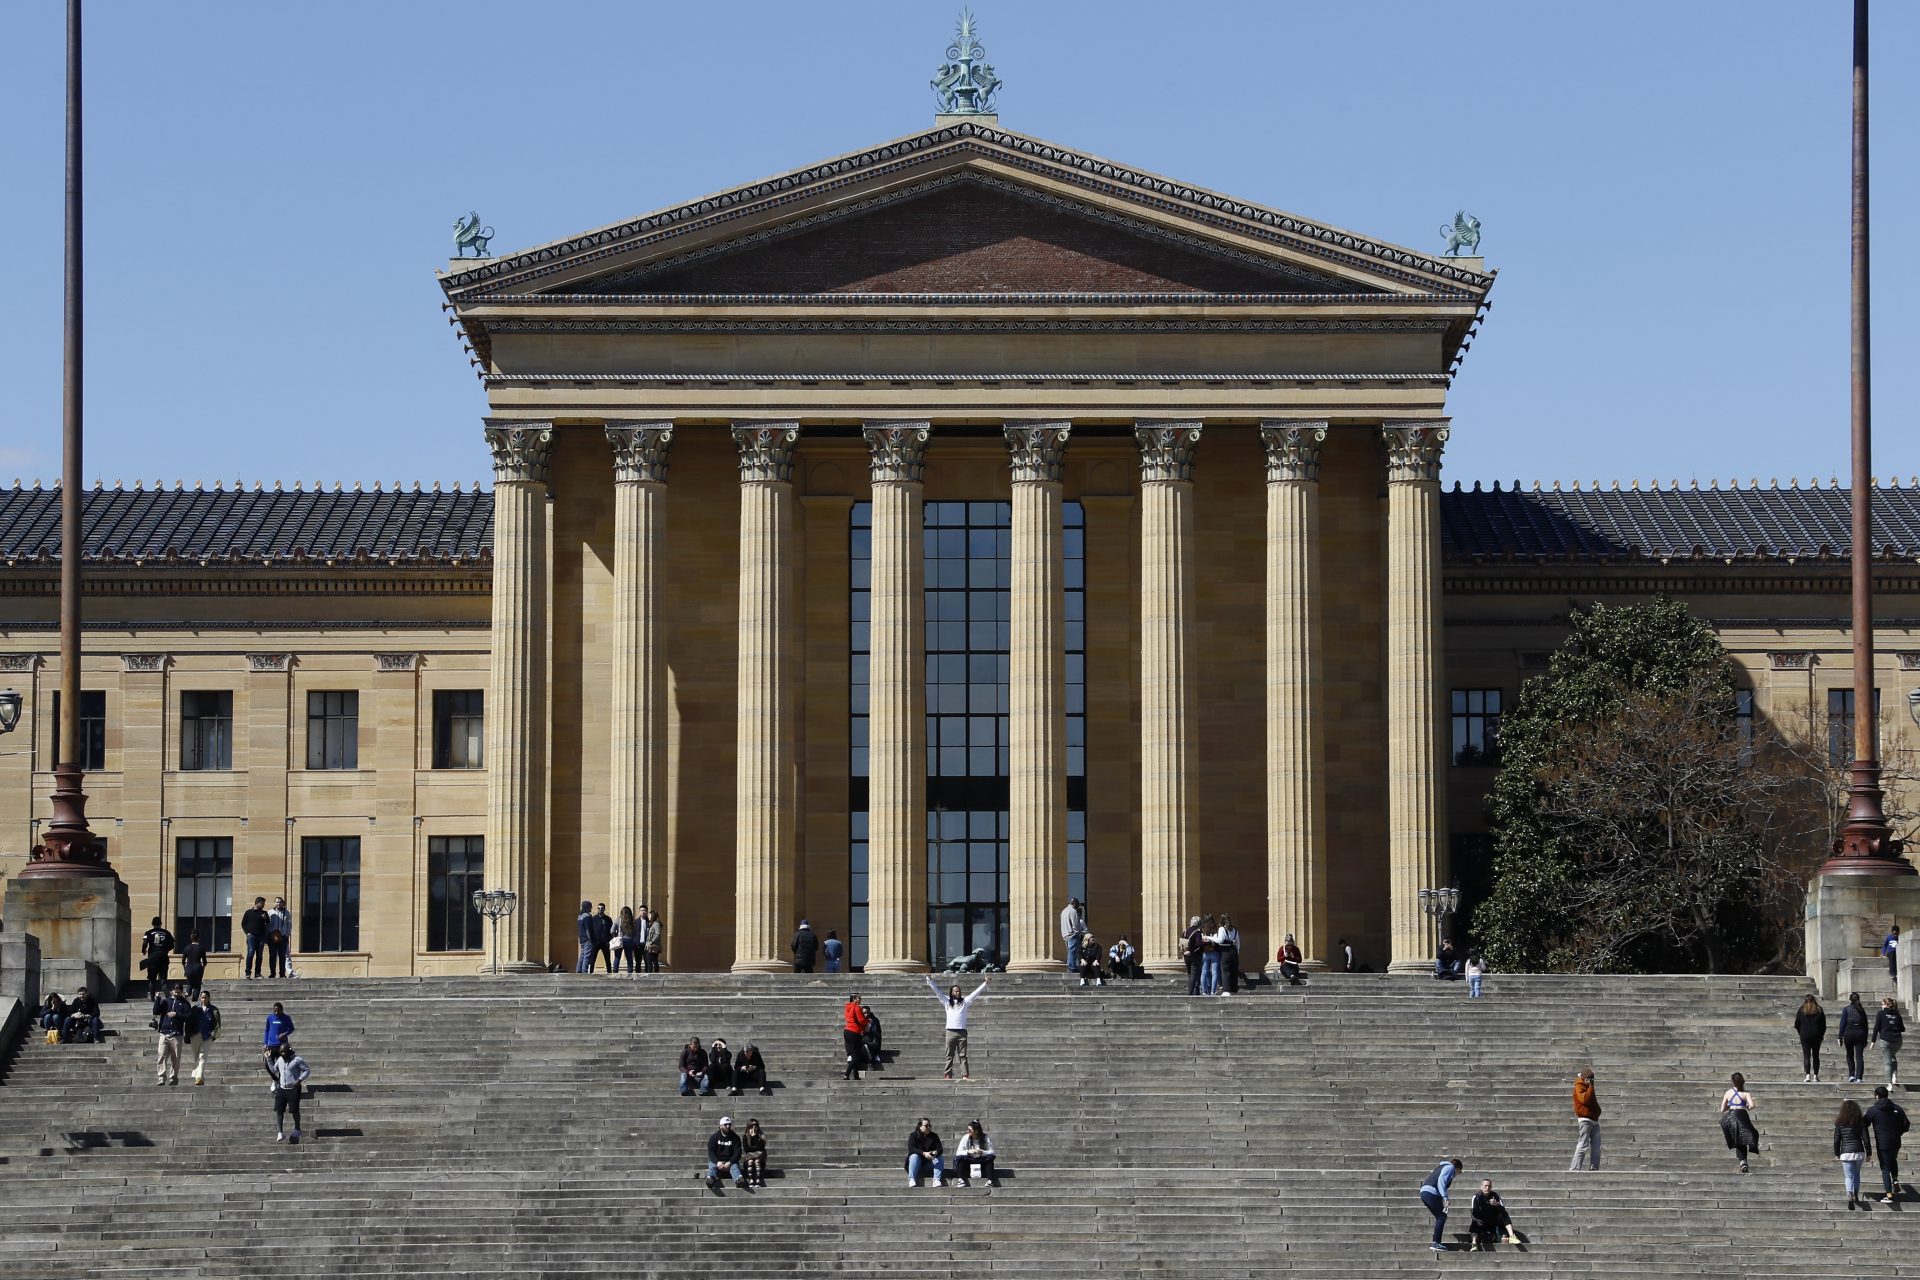 People gather on the steps of The Philadelphia Museum of Art, Sunday, March 15, 2020, in Philadelphia. The museum has temporarily closed due to the COVID-19 pandemic.